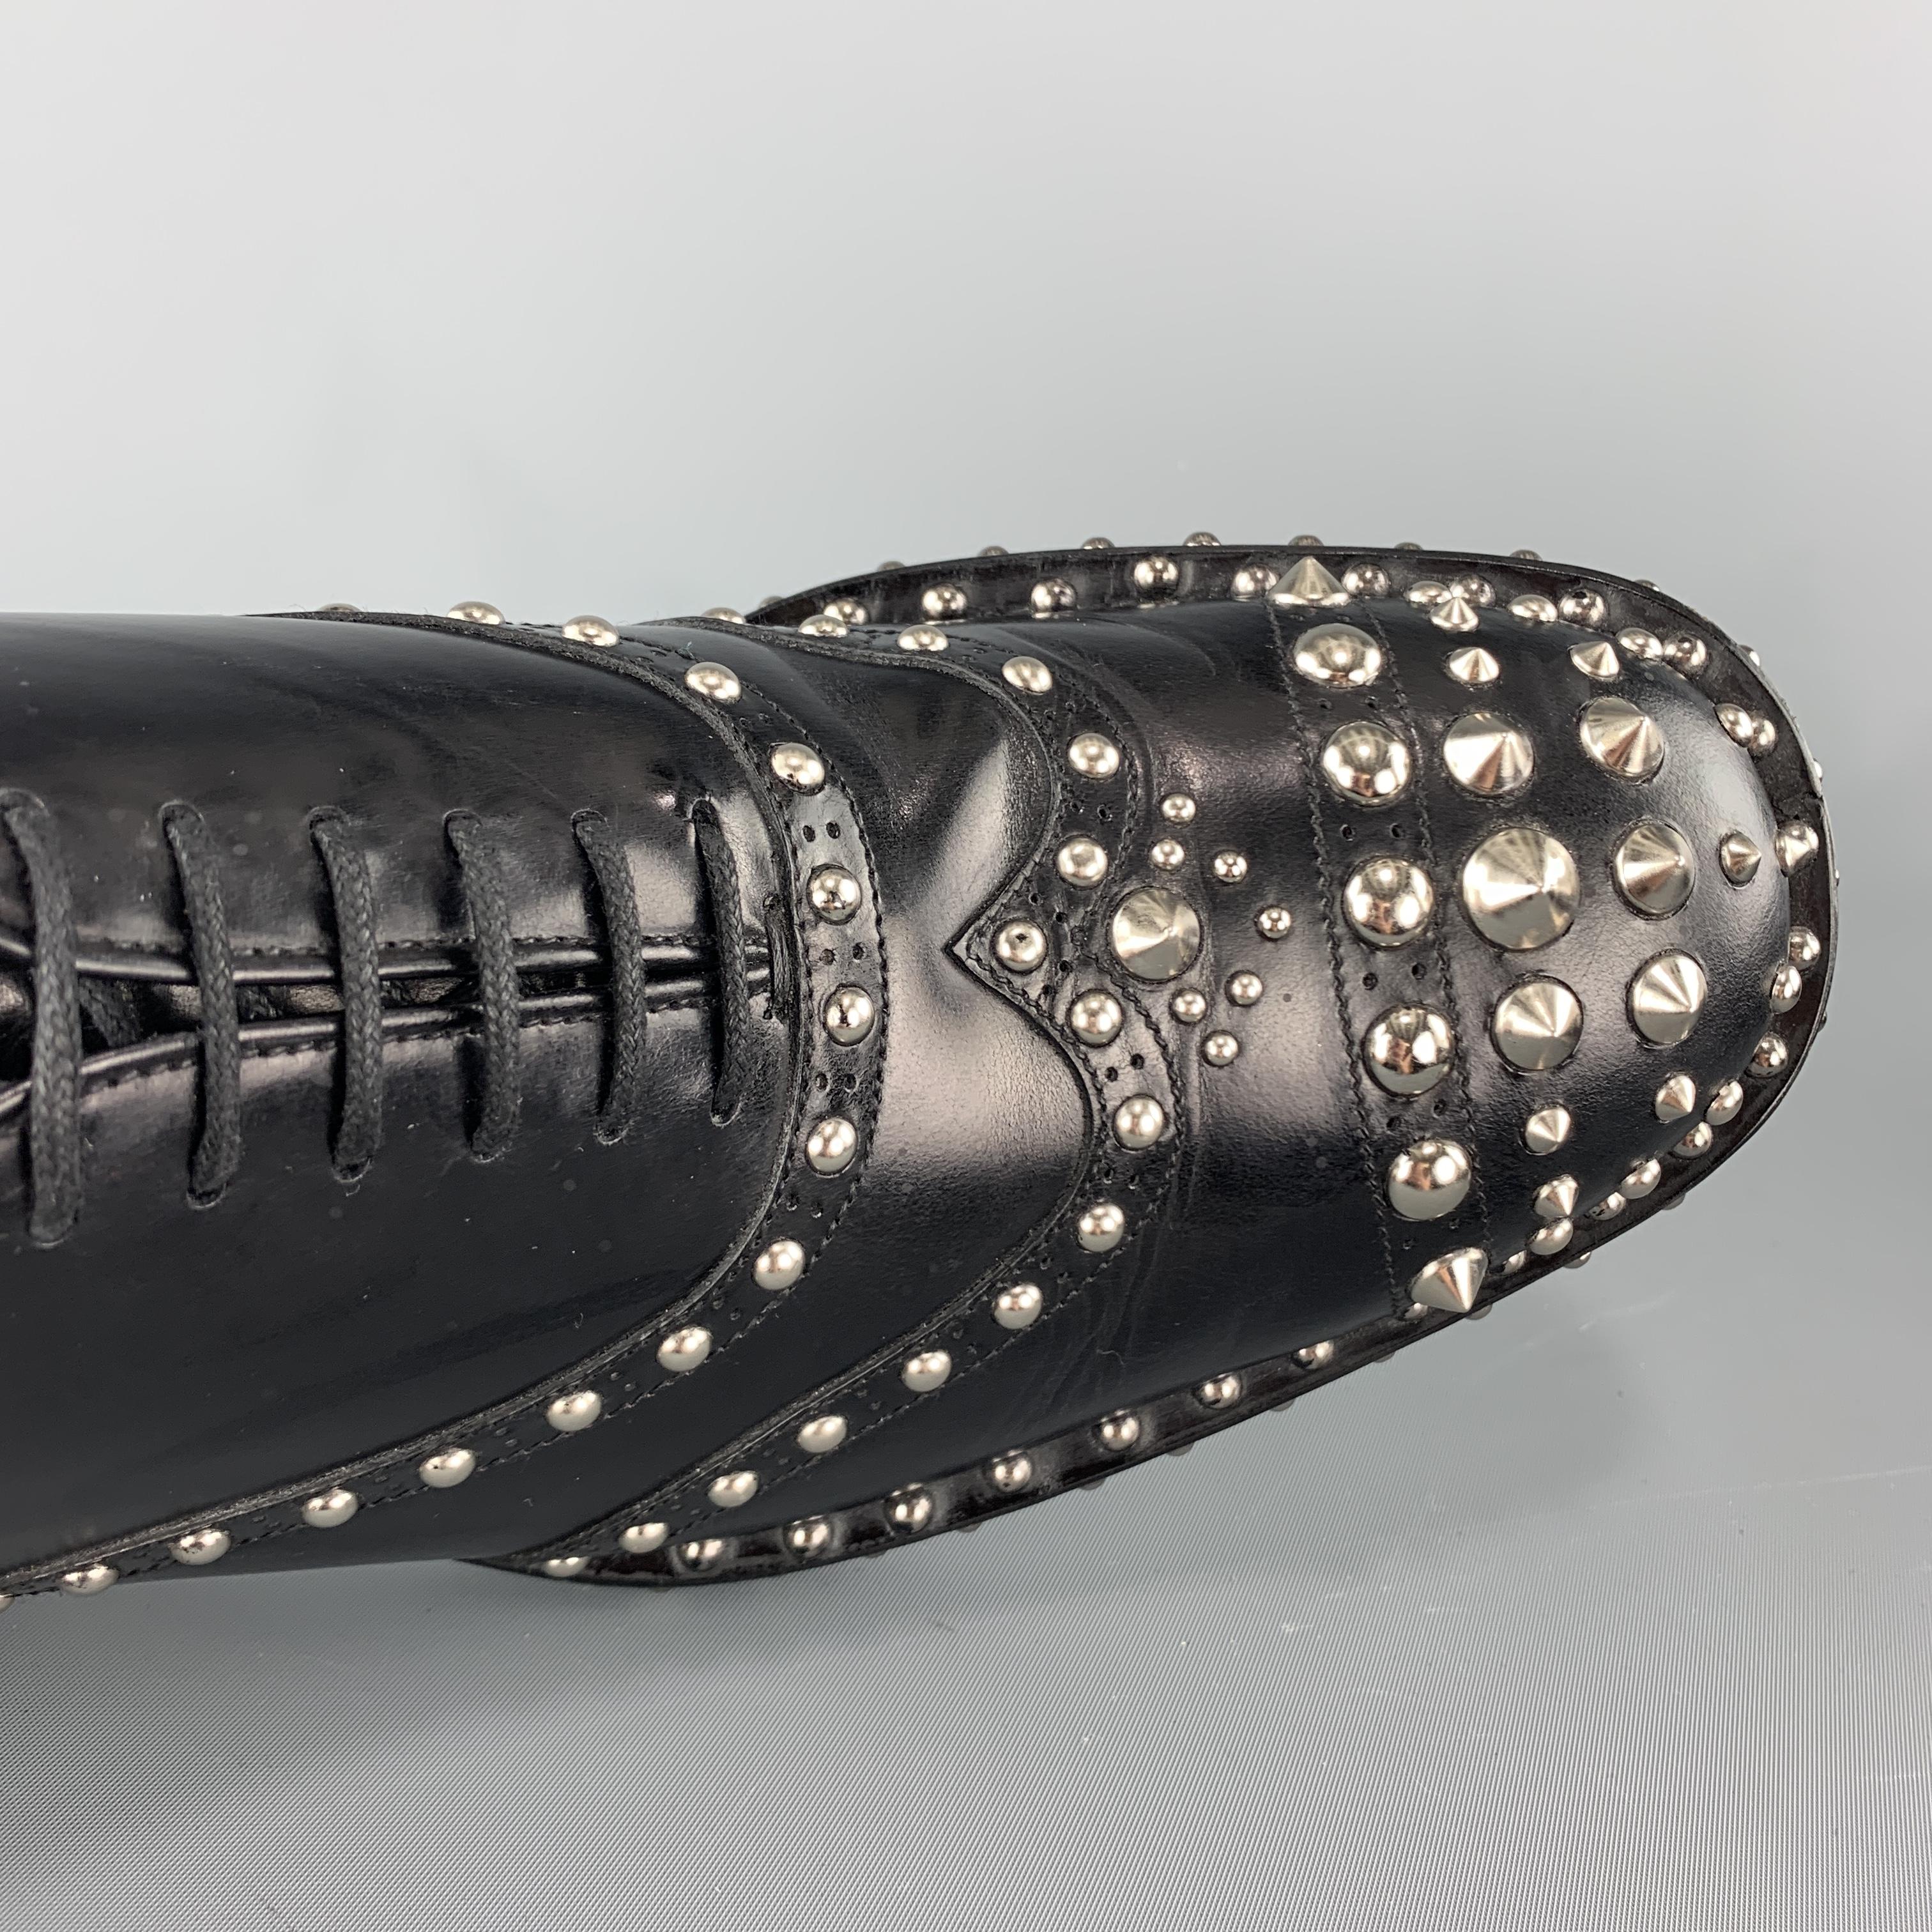 Iconic PRADA Fall / Winter 2009 Collection dress shoes come in polished black leather with a wingtip and silver tone dome and cone spike studs throughout. With box. Made in Italy.

Excellent Pre-Owned Condition.
Marked: UK 7.5

Outsole: 12 x 4.5 in.